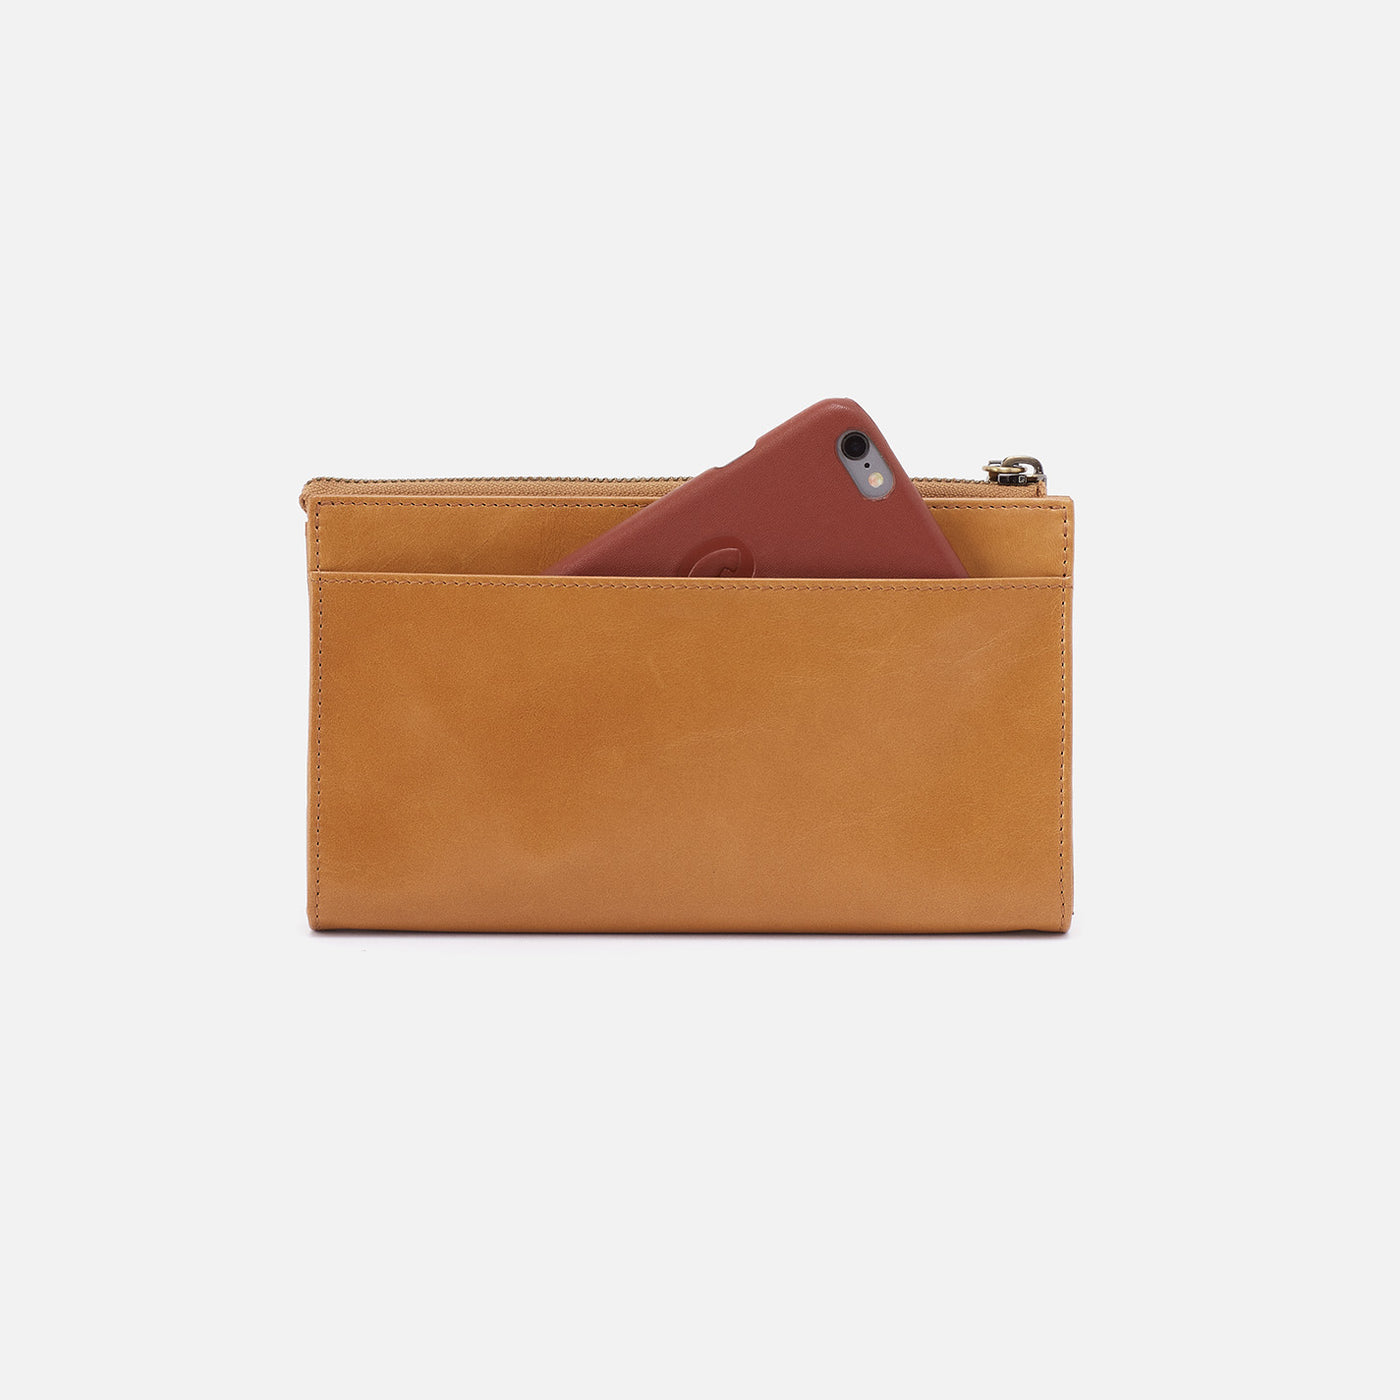 Zenith Wristlet in Mixed Leathers - Natural